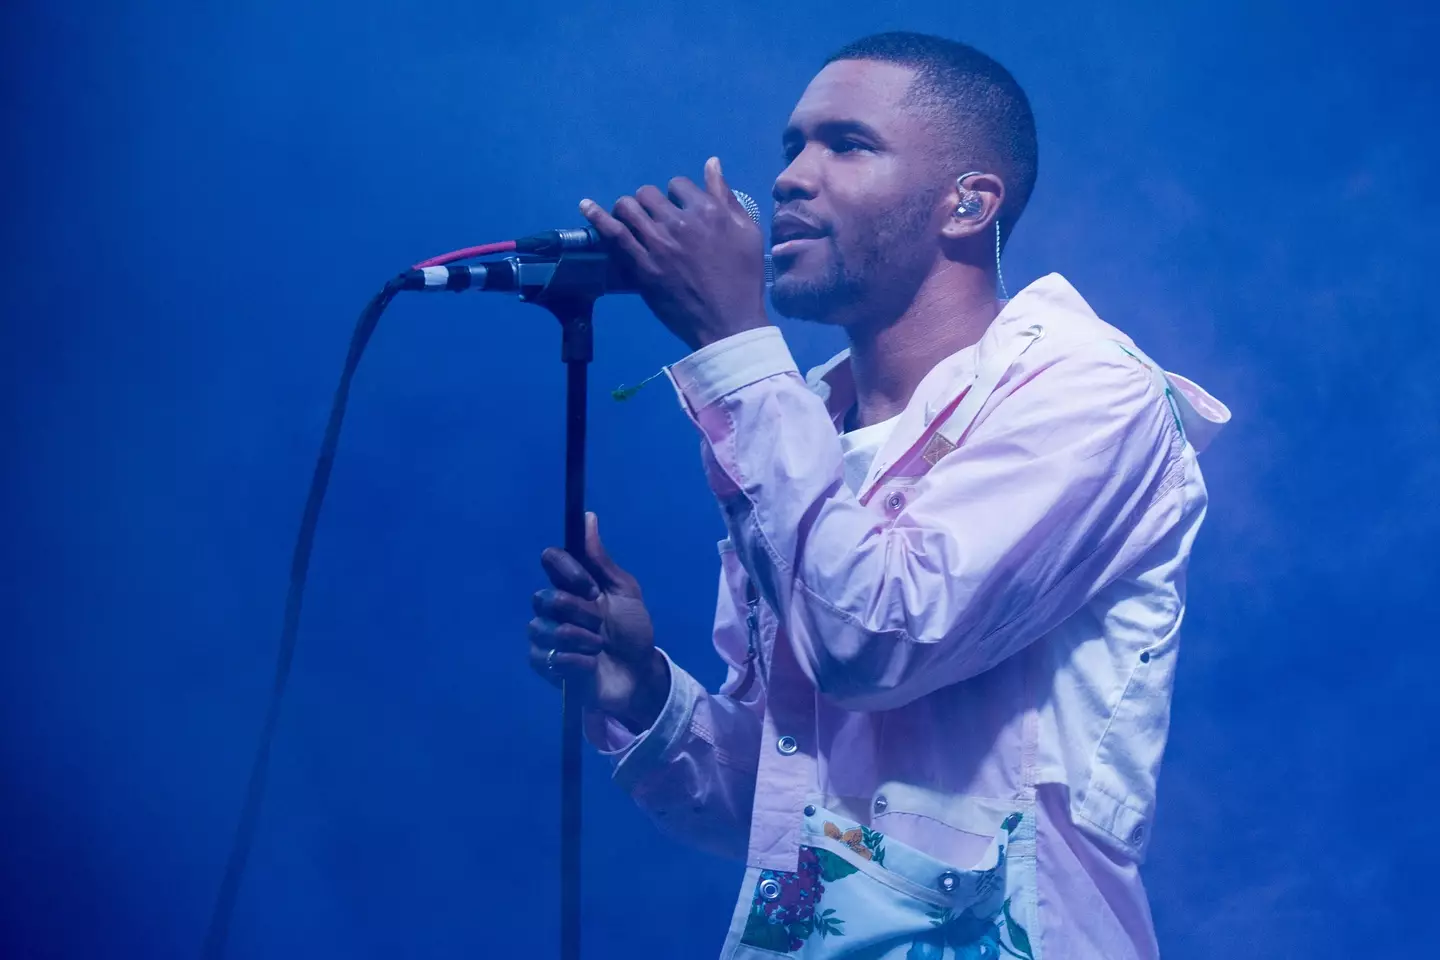 Frank Ocean had to pull out of his second Coachella performance.